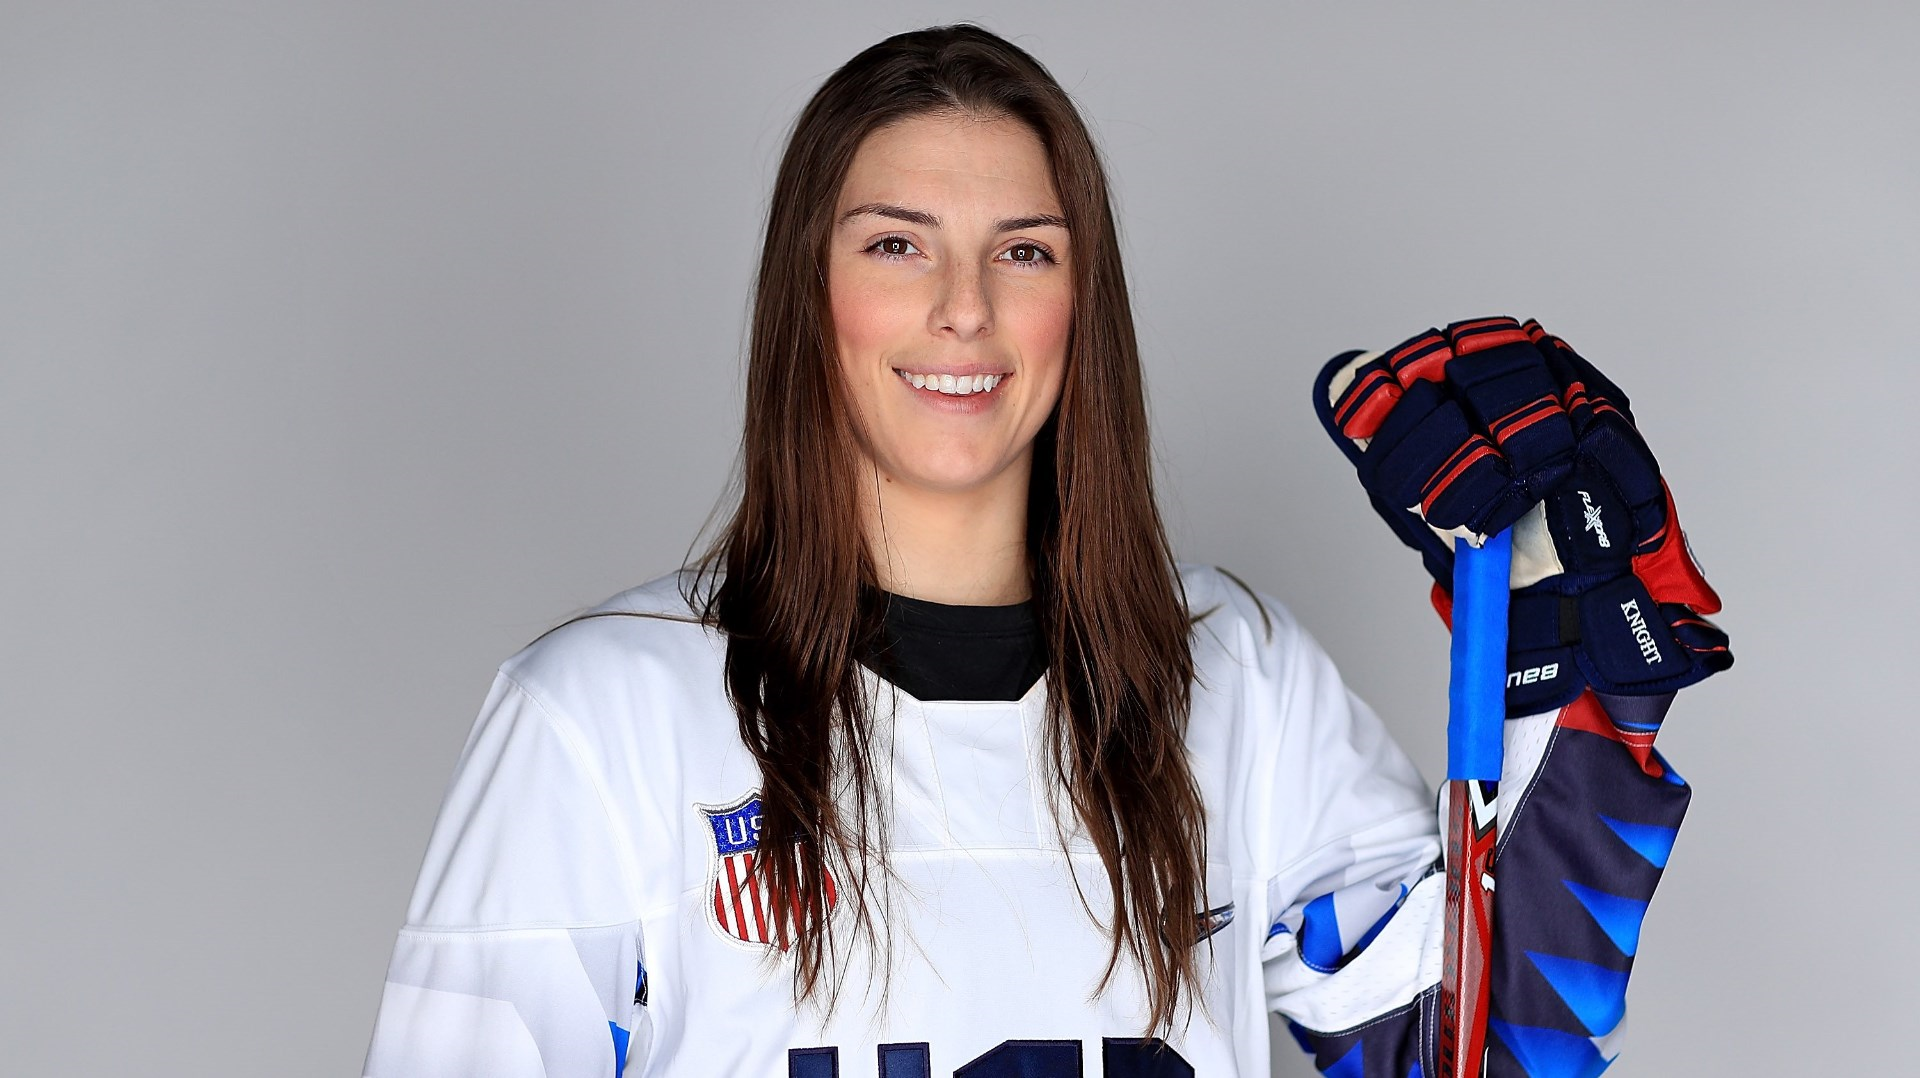 Ice Hockey player Hilary Knight poses for a portrait 